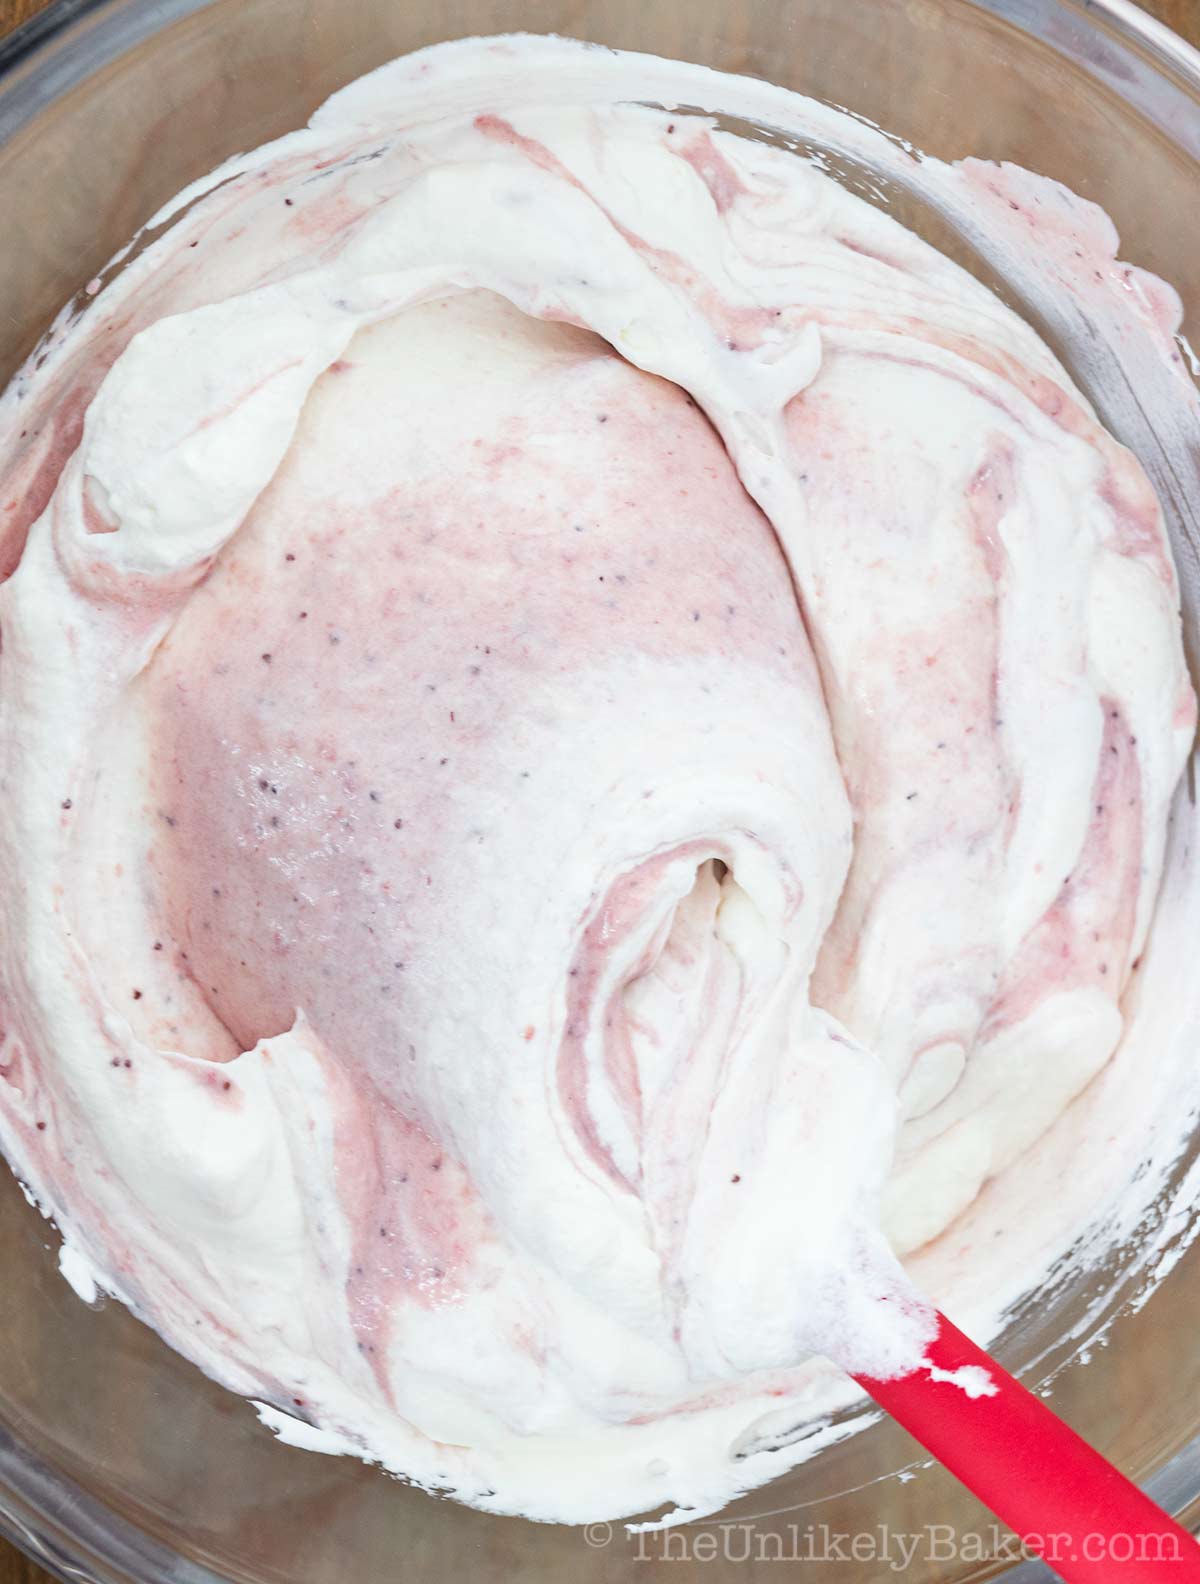 Whipped cream being folded into strawberry mixture.